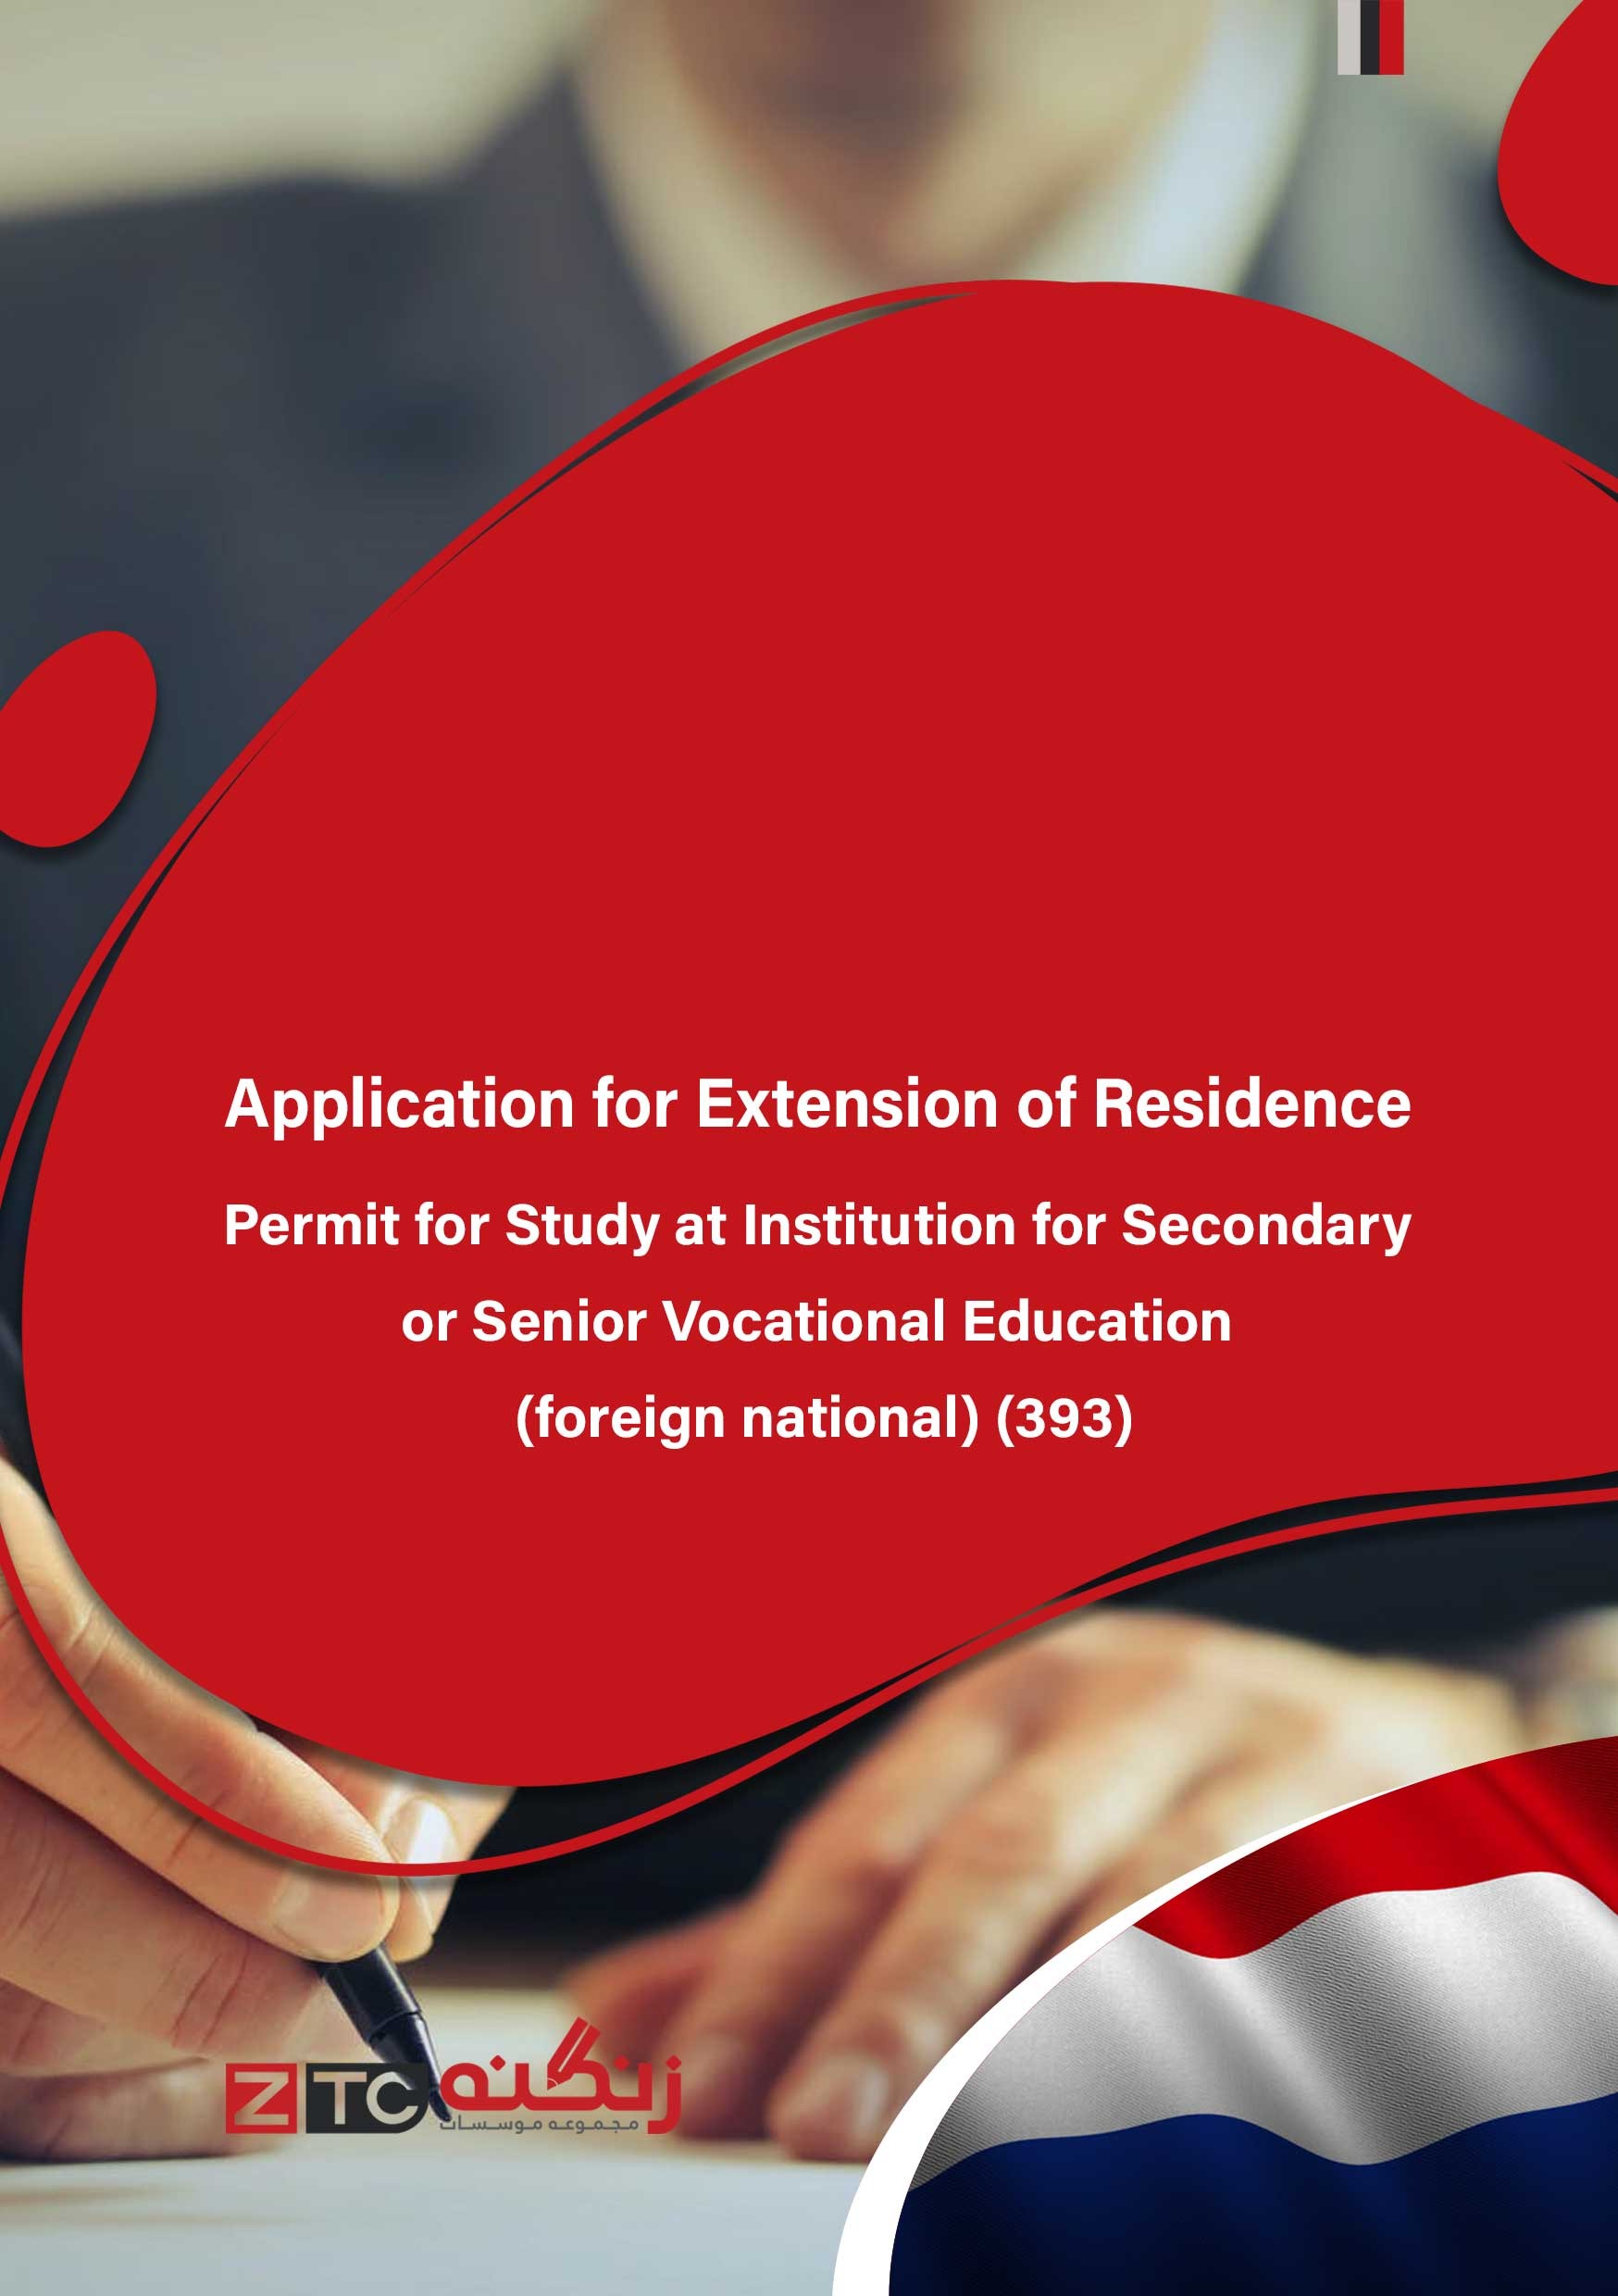 Application for Extension of Residence Permit for Study at Institution for Secondary or Senior Vocational Education (foreign national) (393)